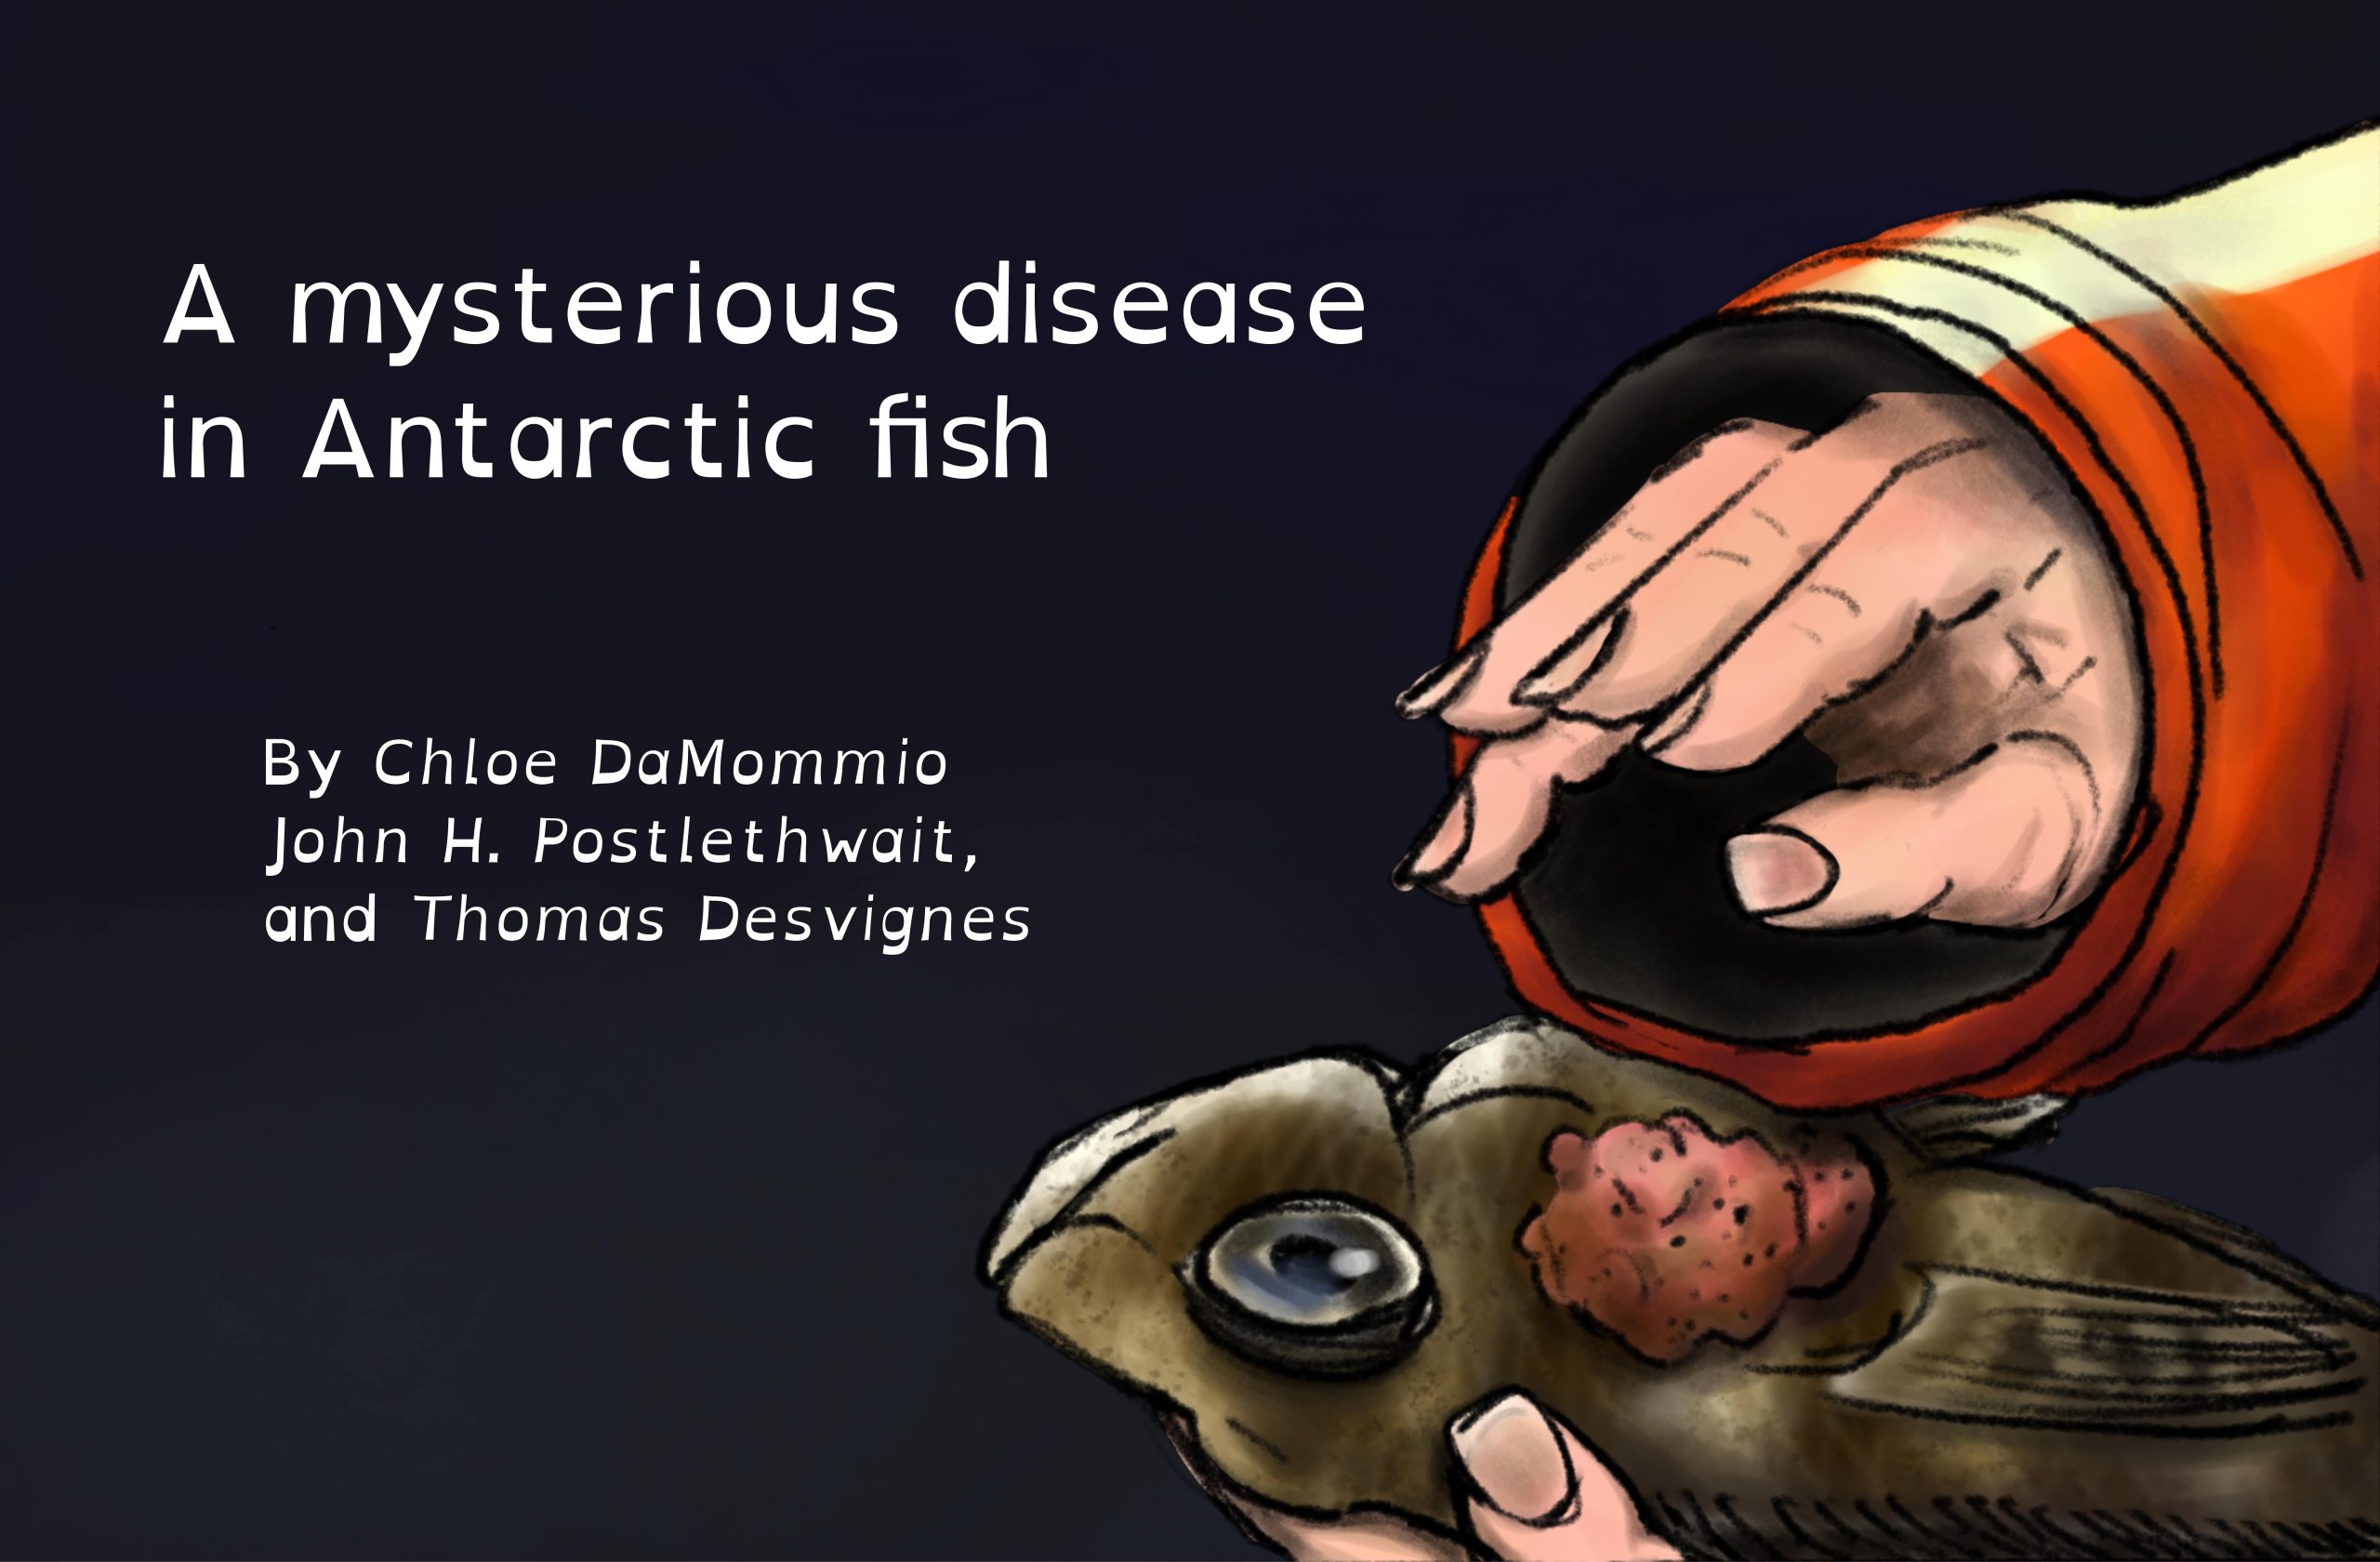 Cover: A mysterious disease in Antarctic fish by Chloe Da Mommio John H. Postlethwait, and Thomas Desvignes. A close up on a person in a jacket holding a green fish with a red growth on its side.